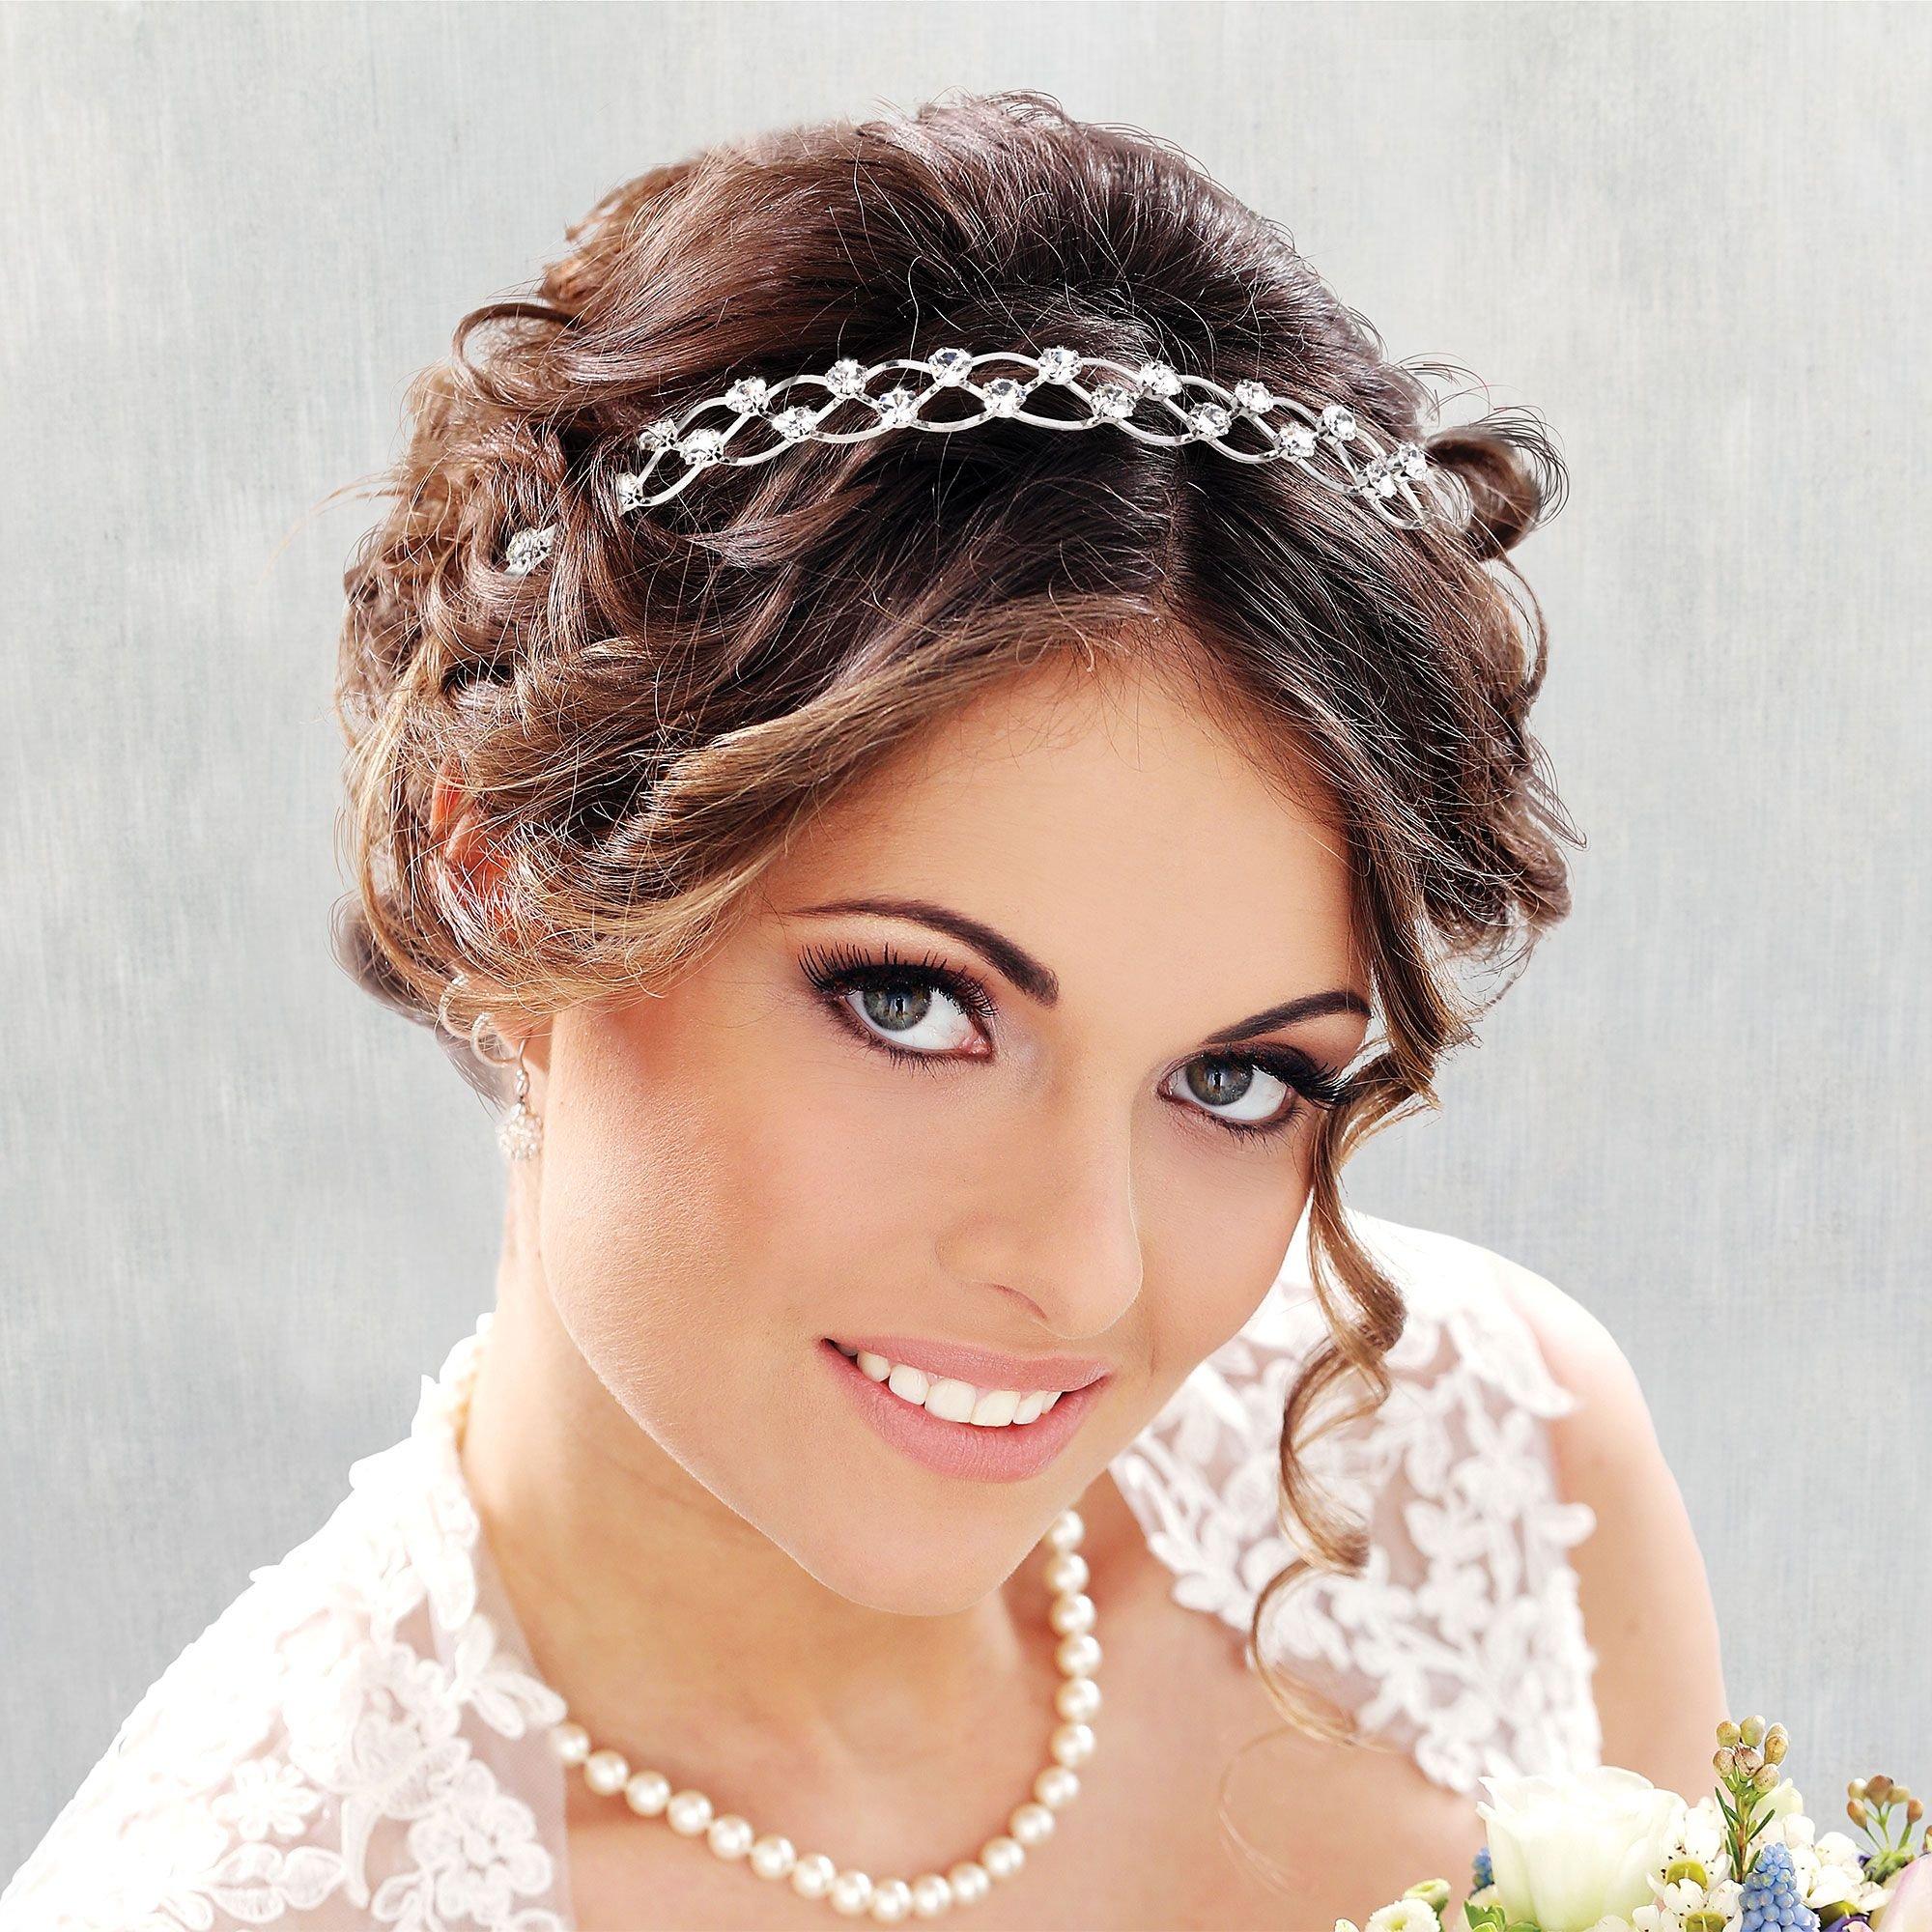 Braided Bridal Headband 5/8in x 5in | Party City